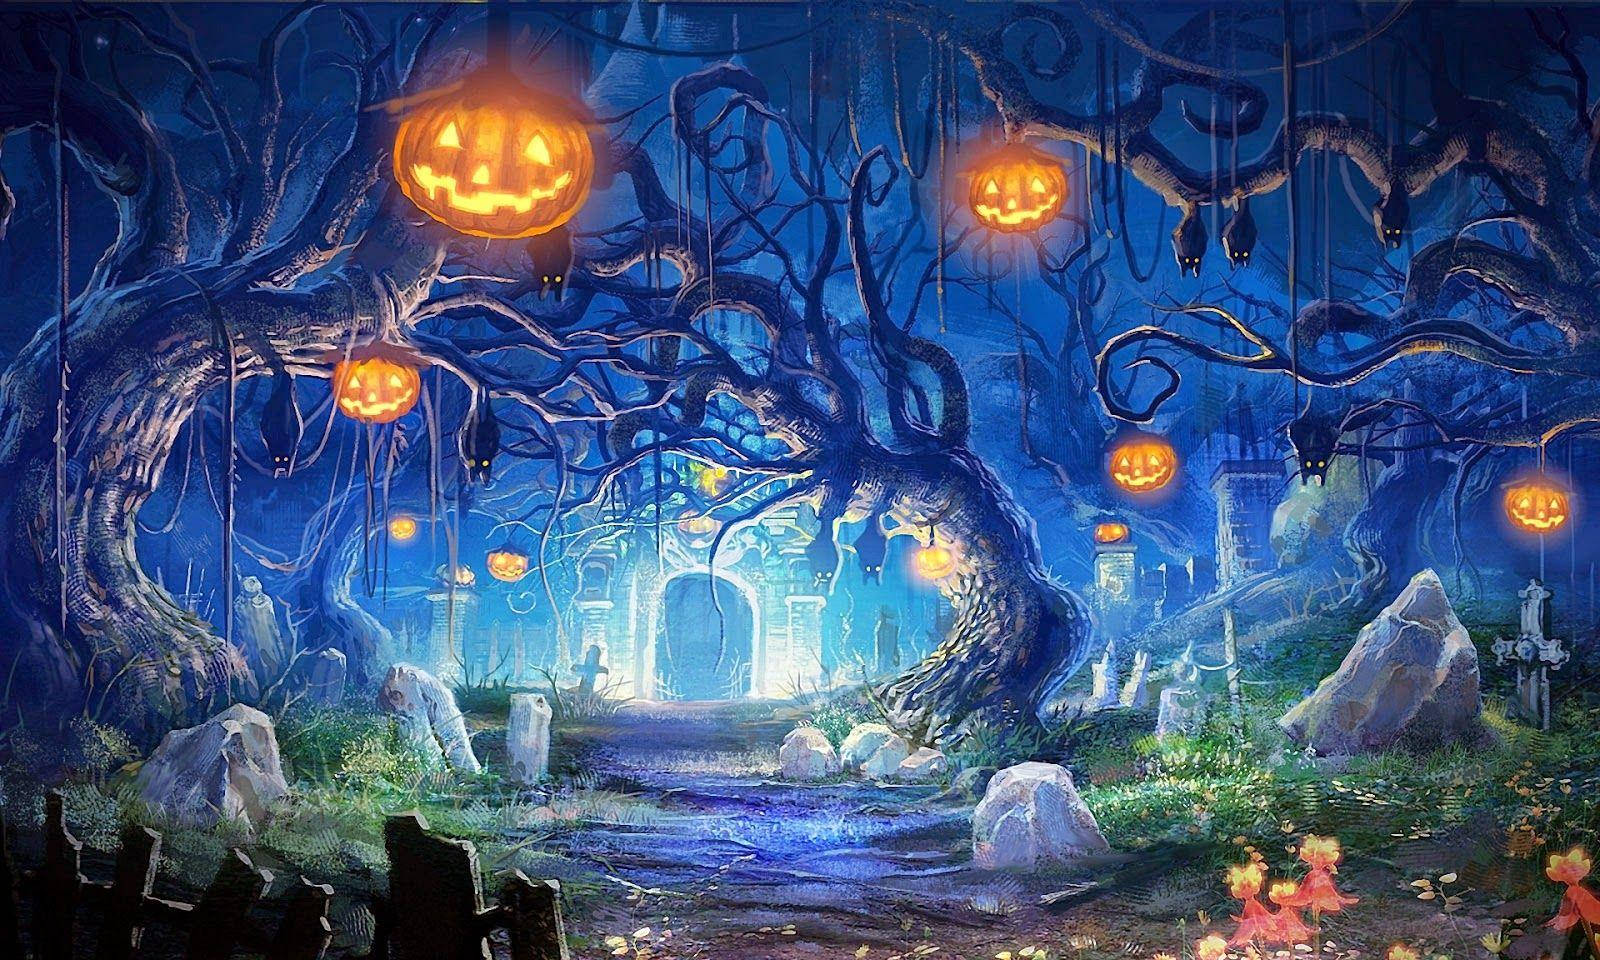 Trick-or-treaters Beware: Beware The Haunted House On Halloween Night Wallpaper